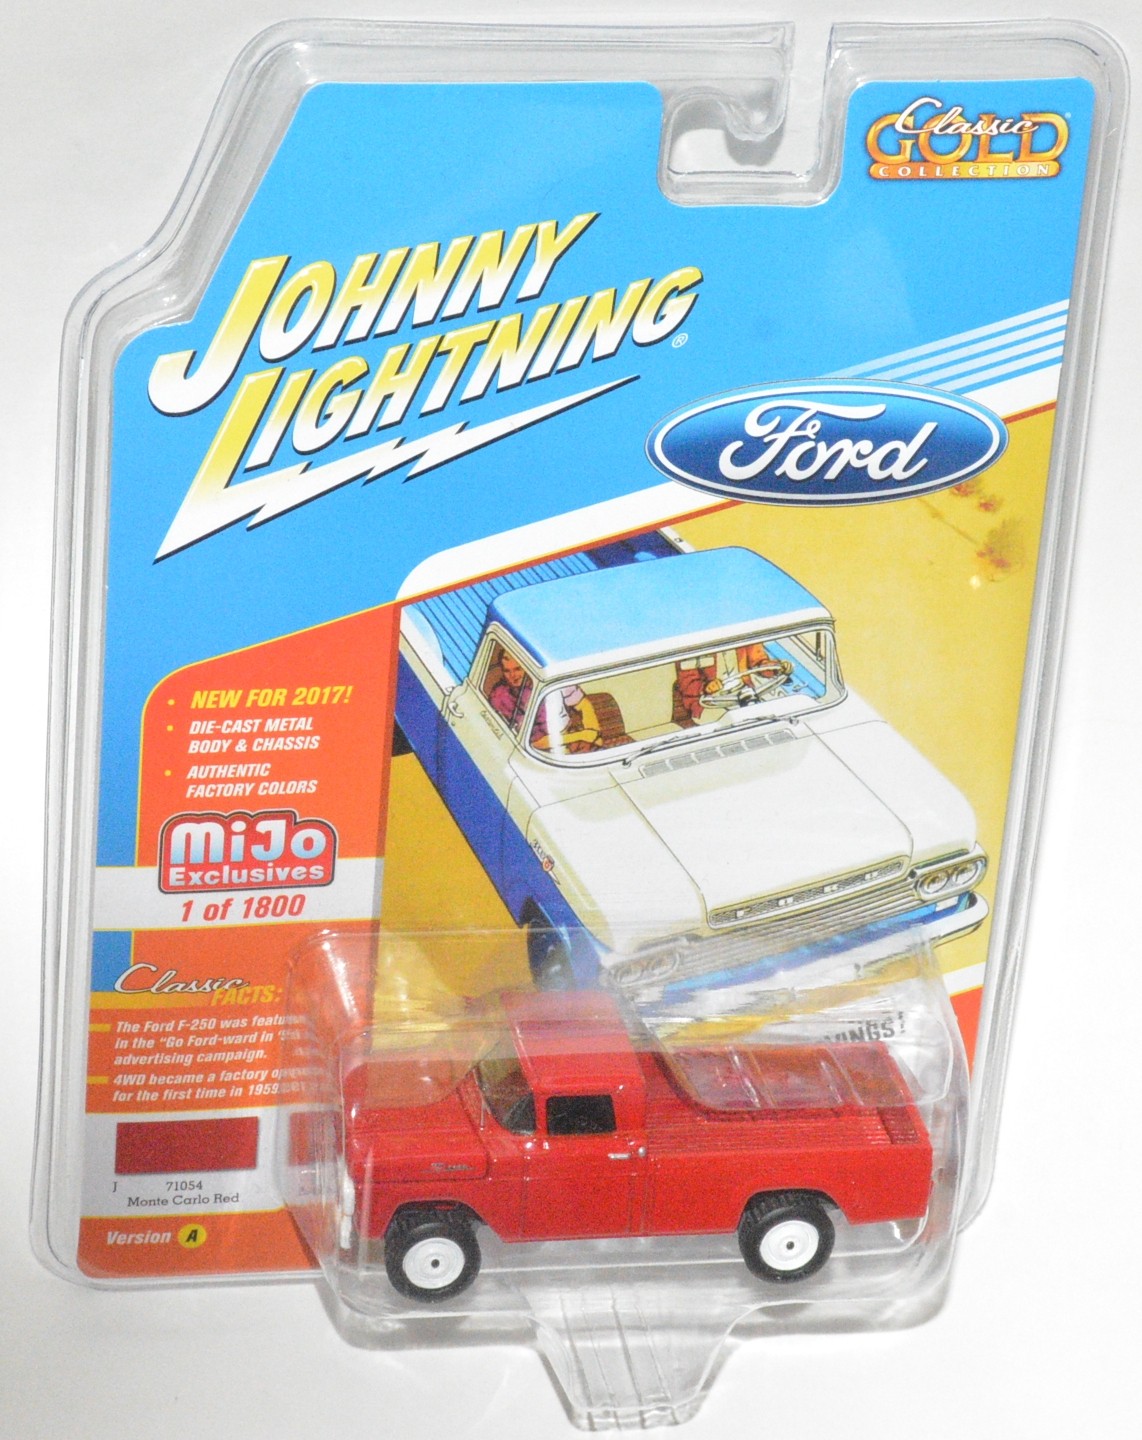 JOHNNY LIGHTNING GONE FISHING JLBT002 1959 FORD F 250 TRUCK with BOAT 1/64  CHASE $49.97 - PicClick